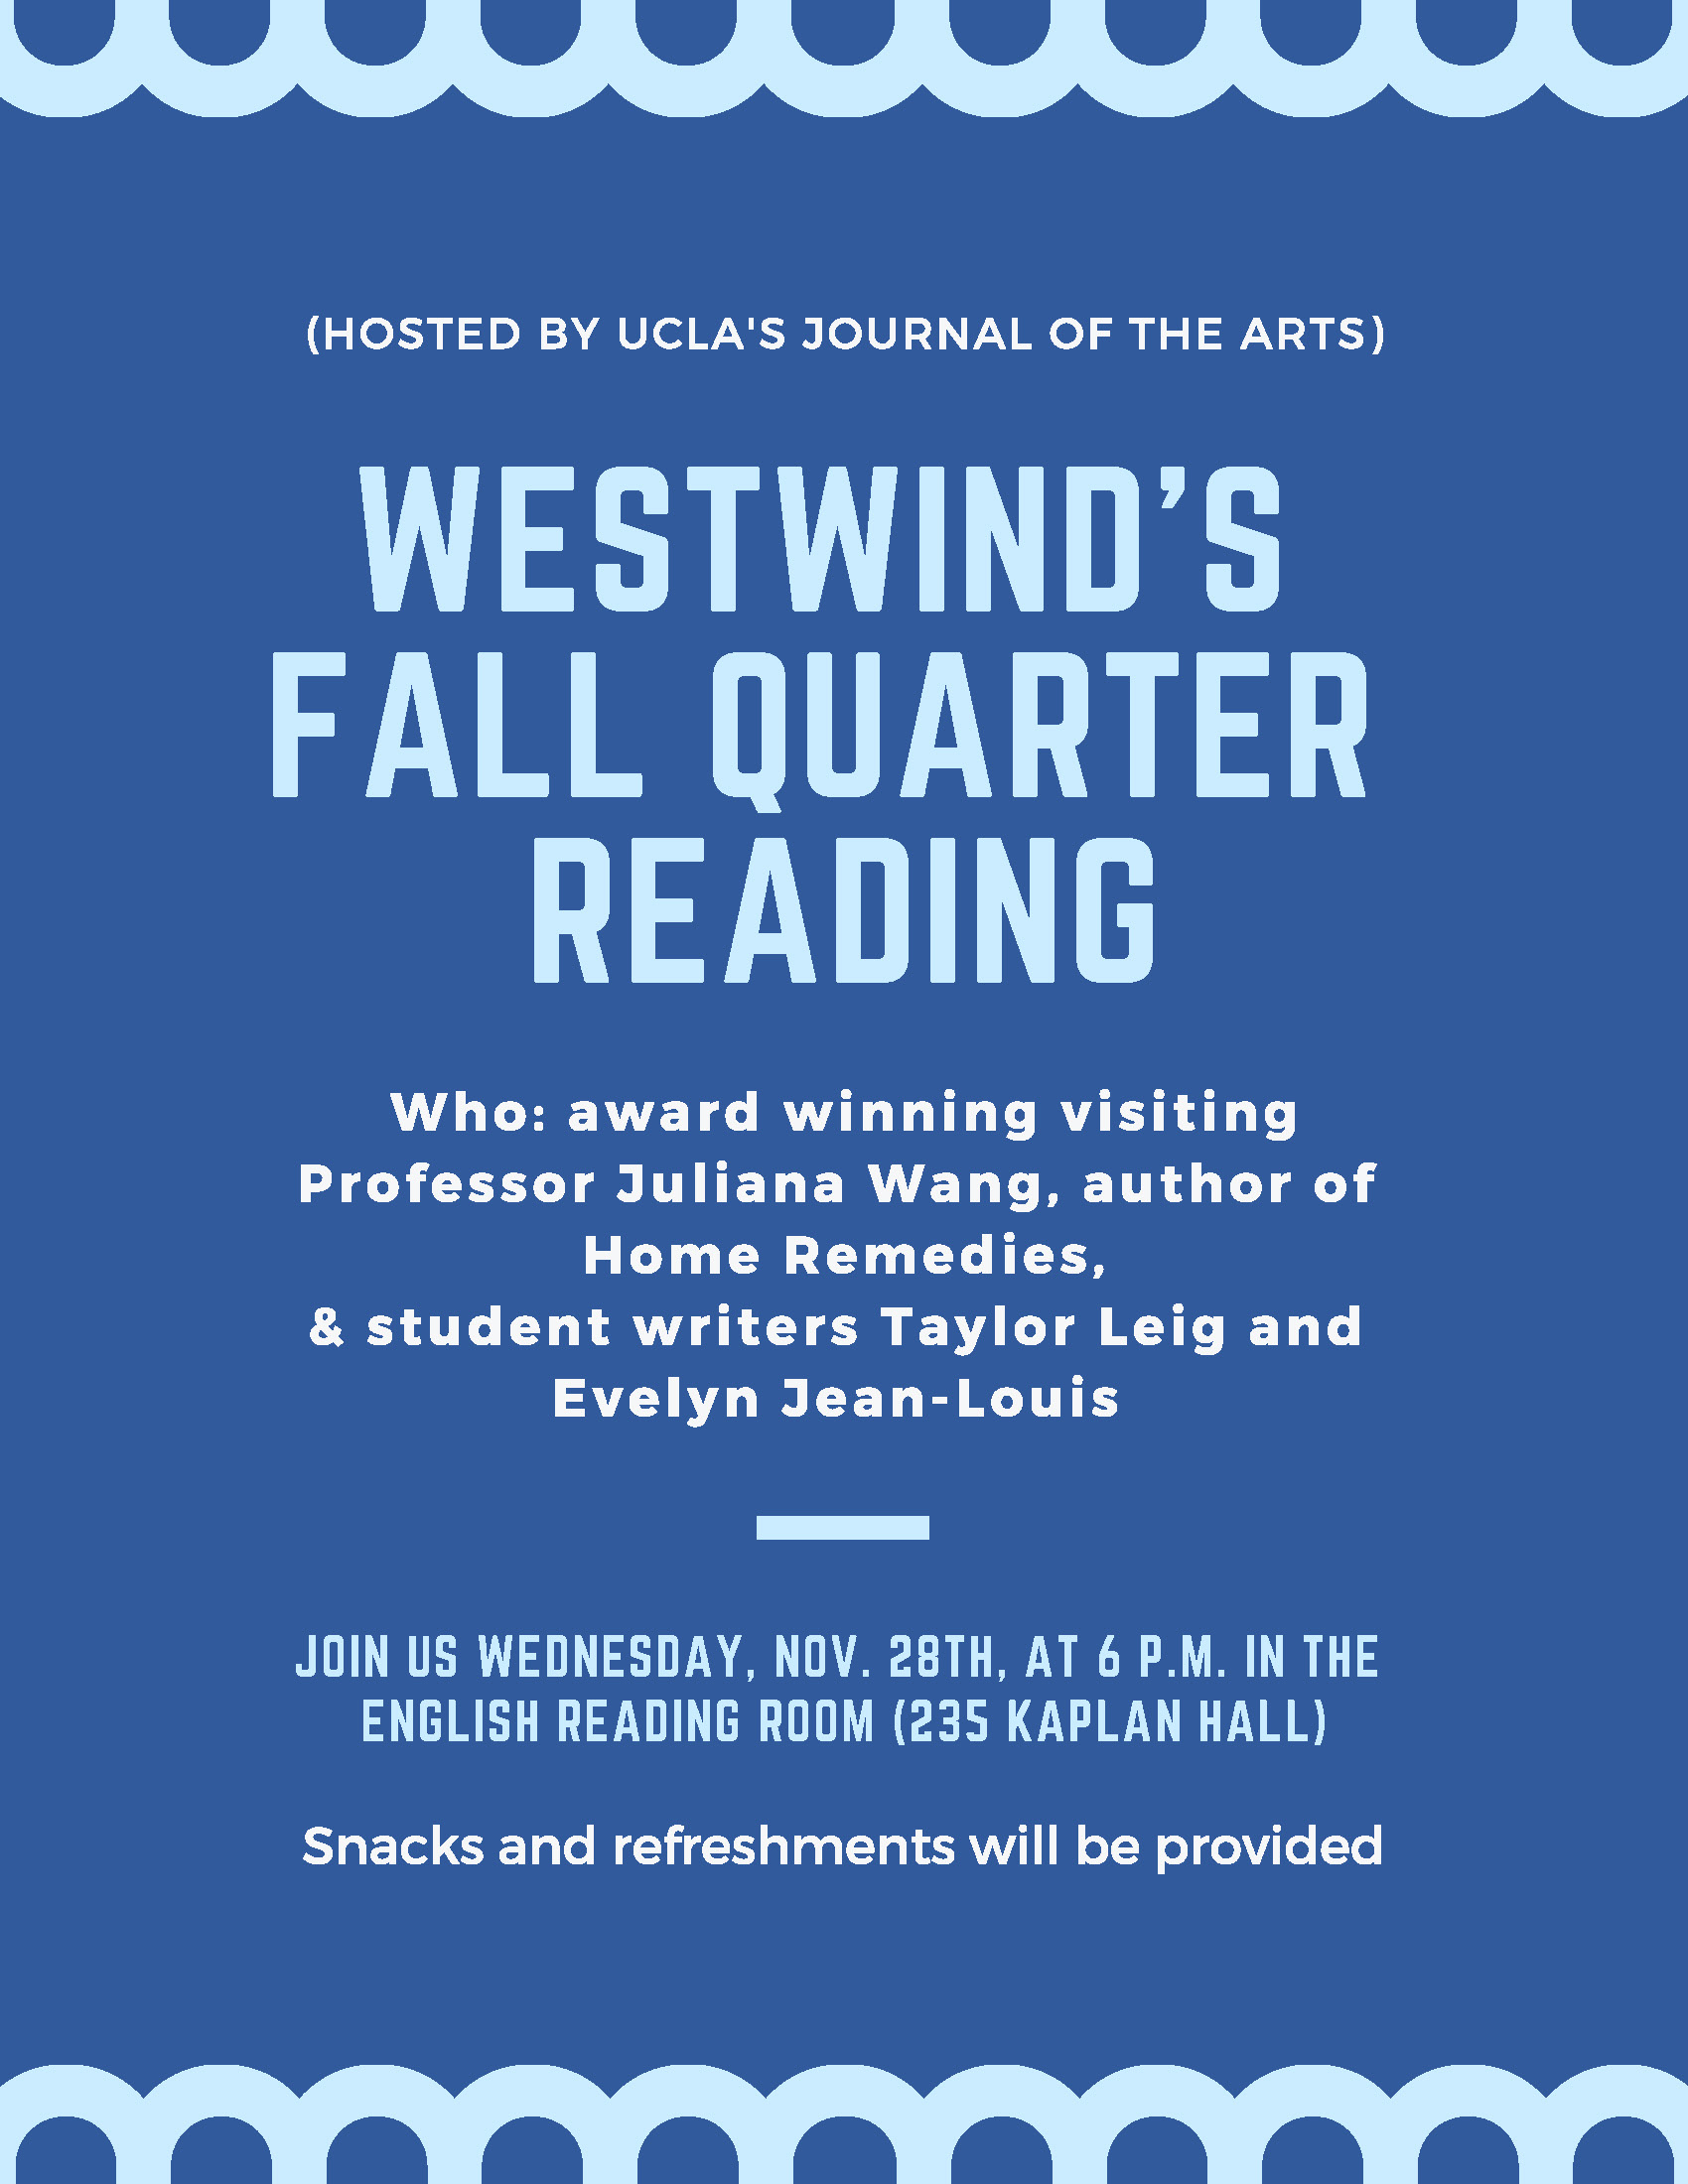 Westwind’s Fall Quarter Reading with Juliana Wang – Department of